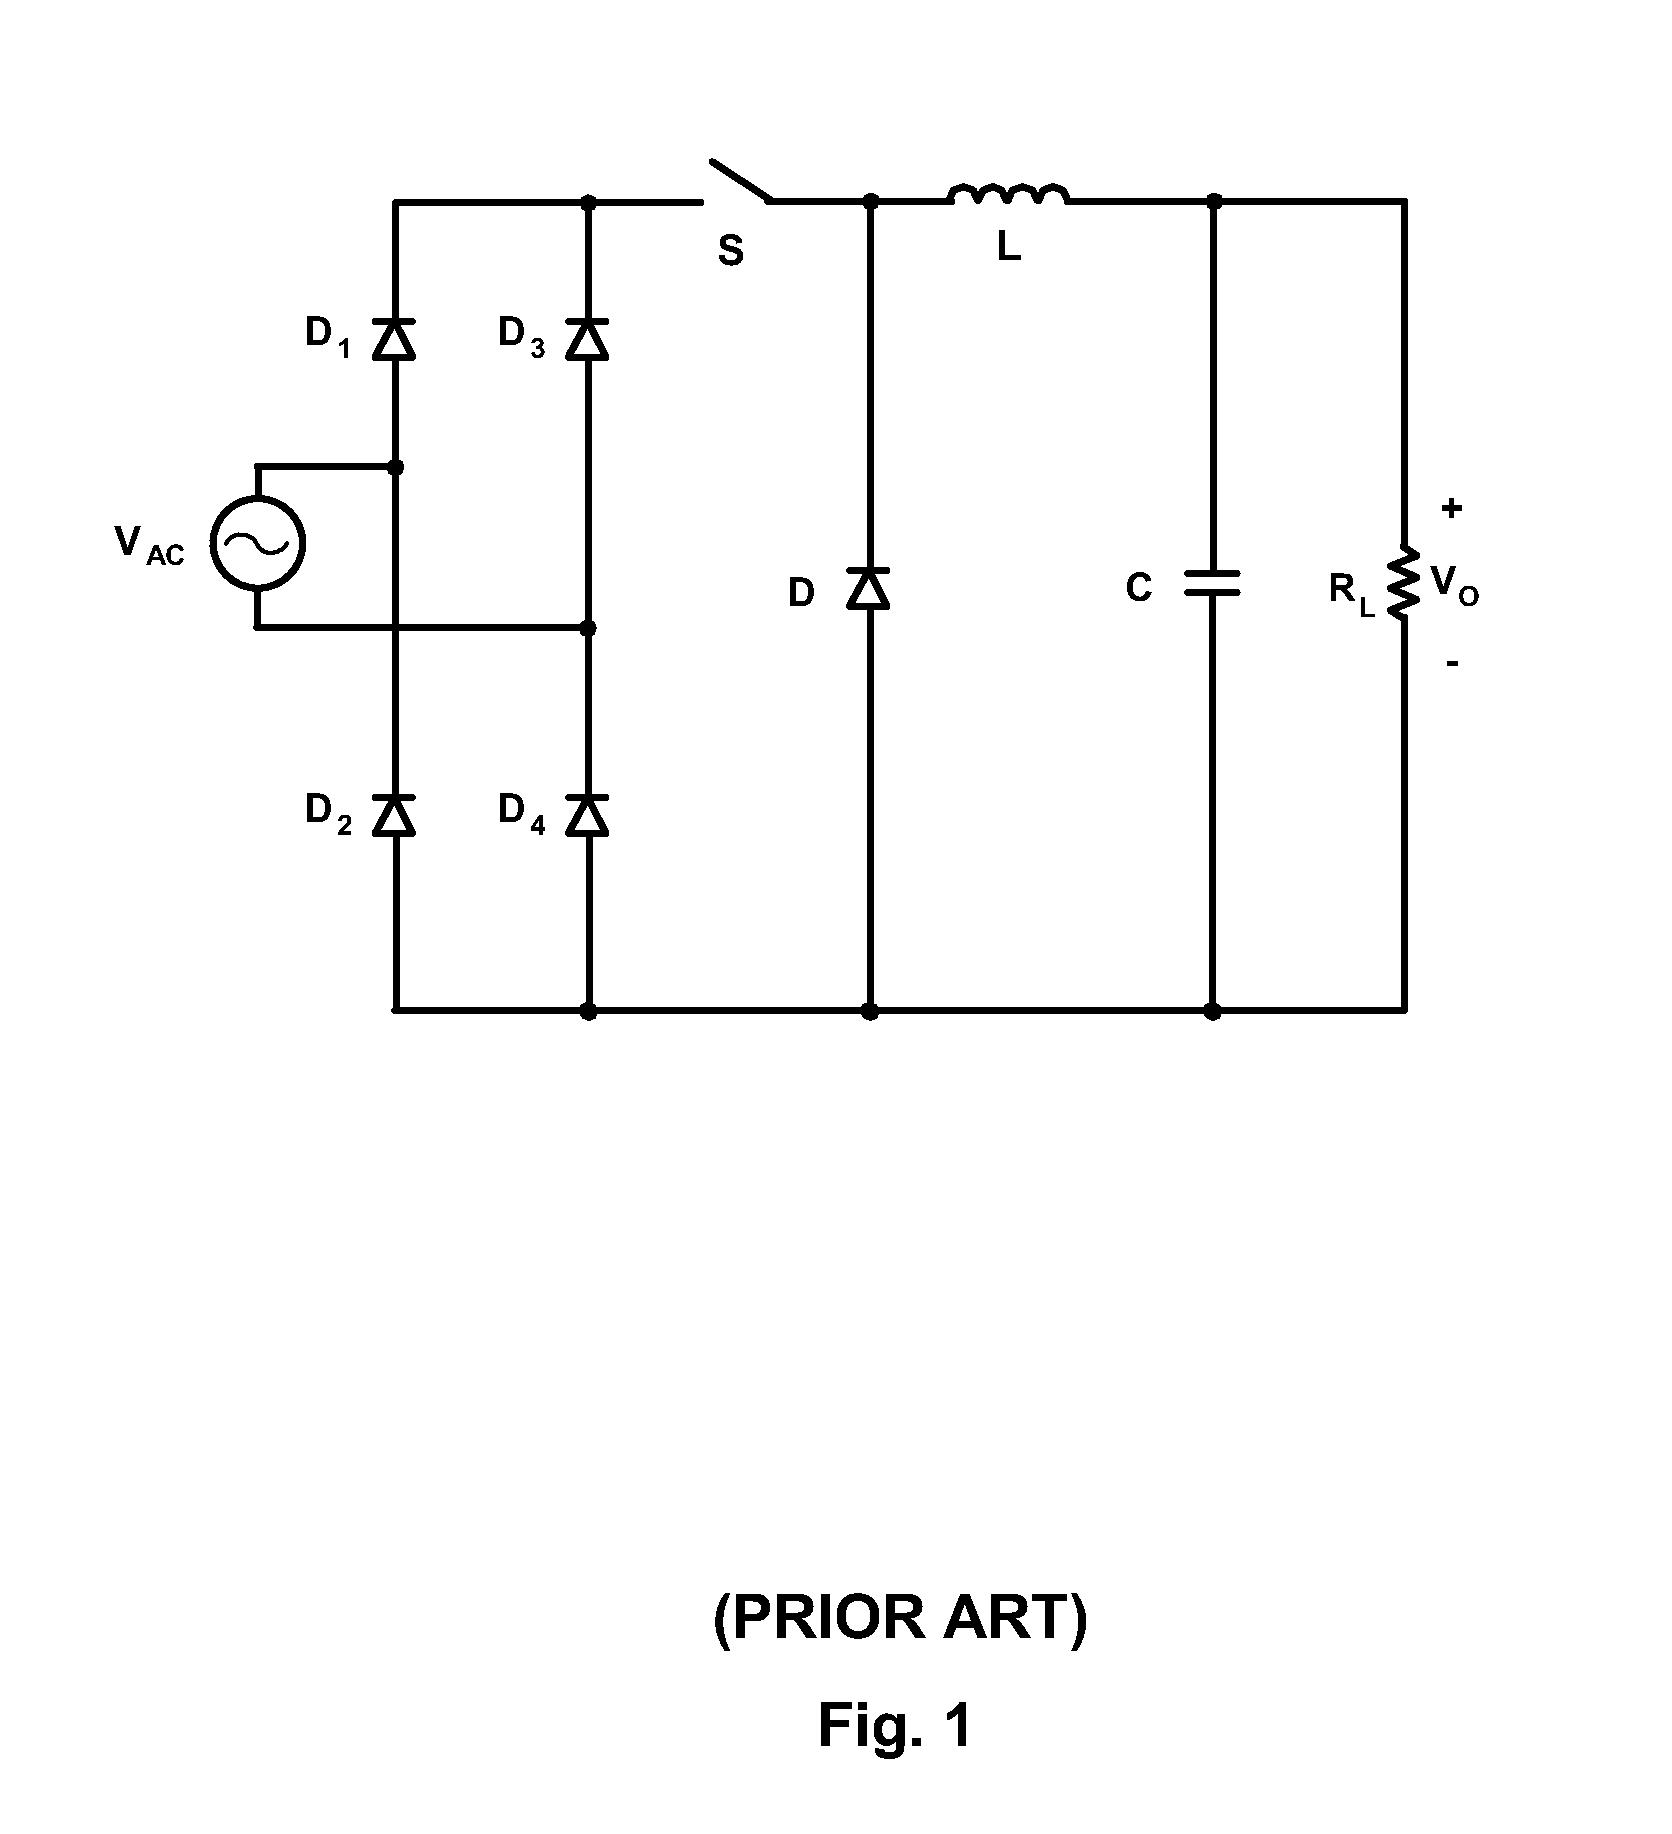 Power factor correction rectifier that operates efficiently over a range of input voltage conditions